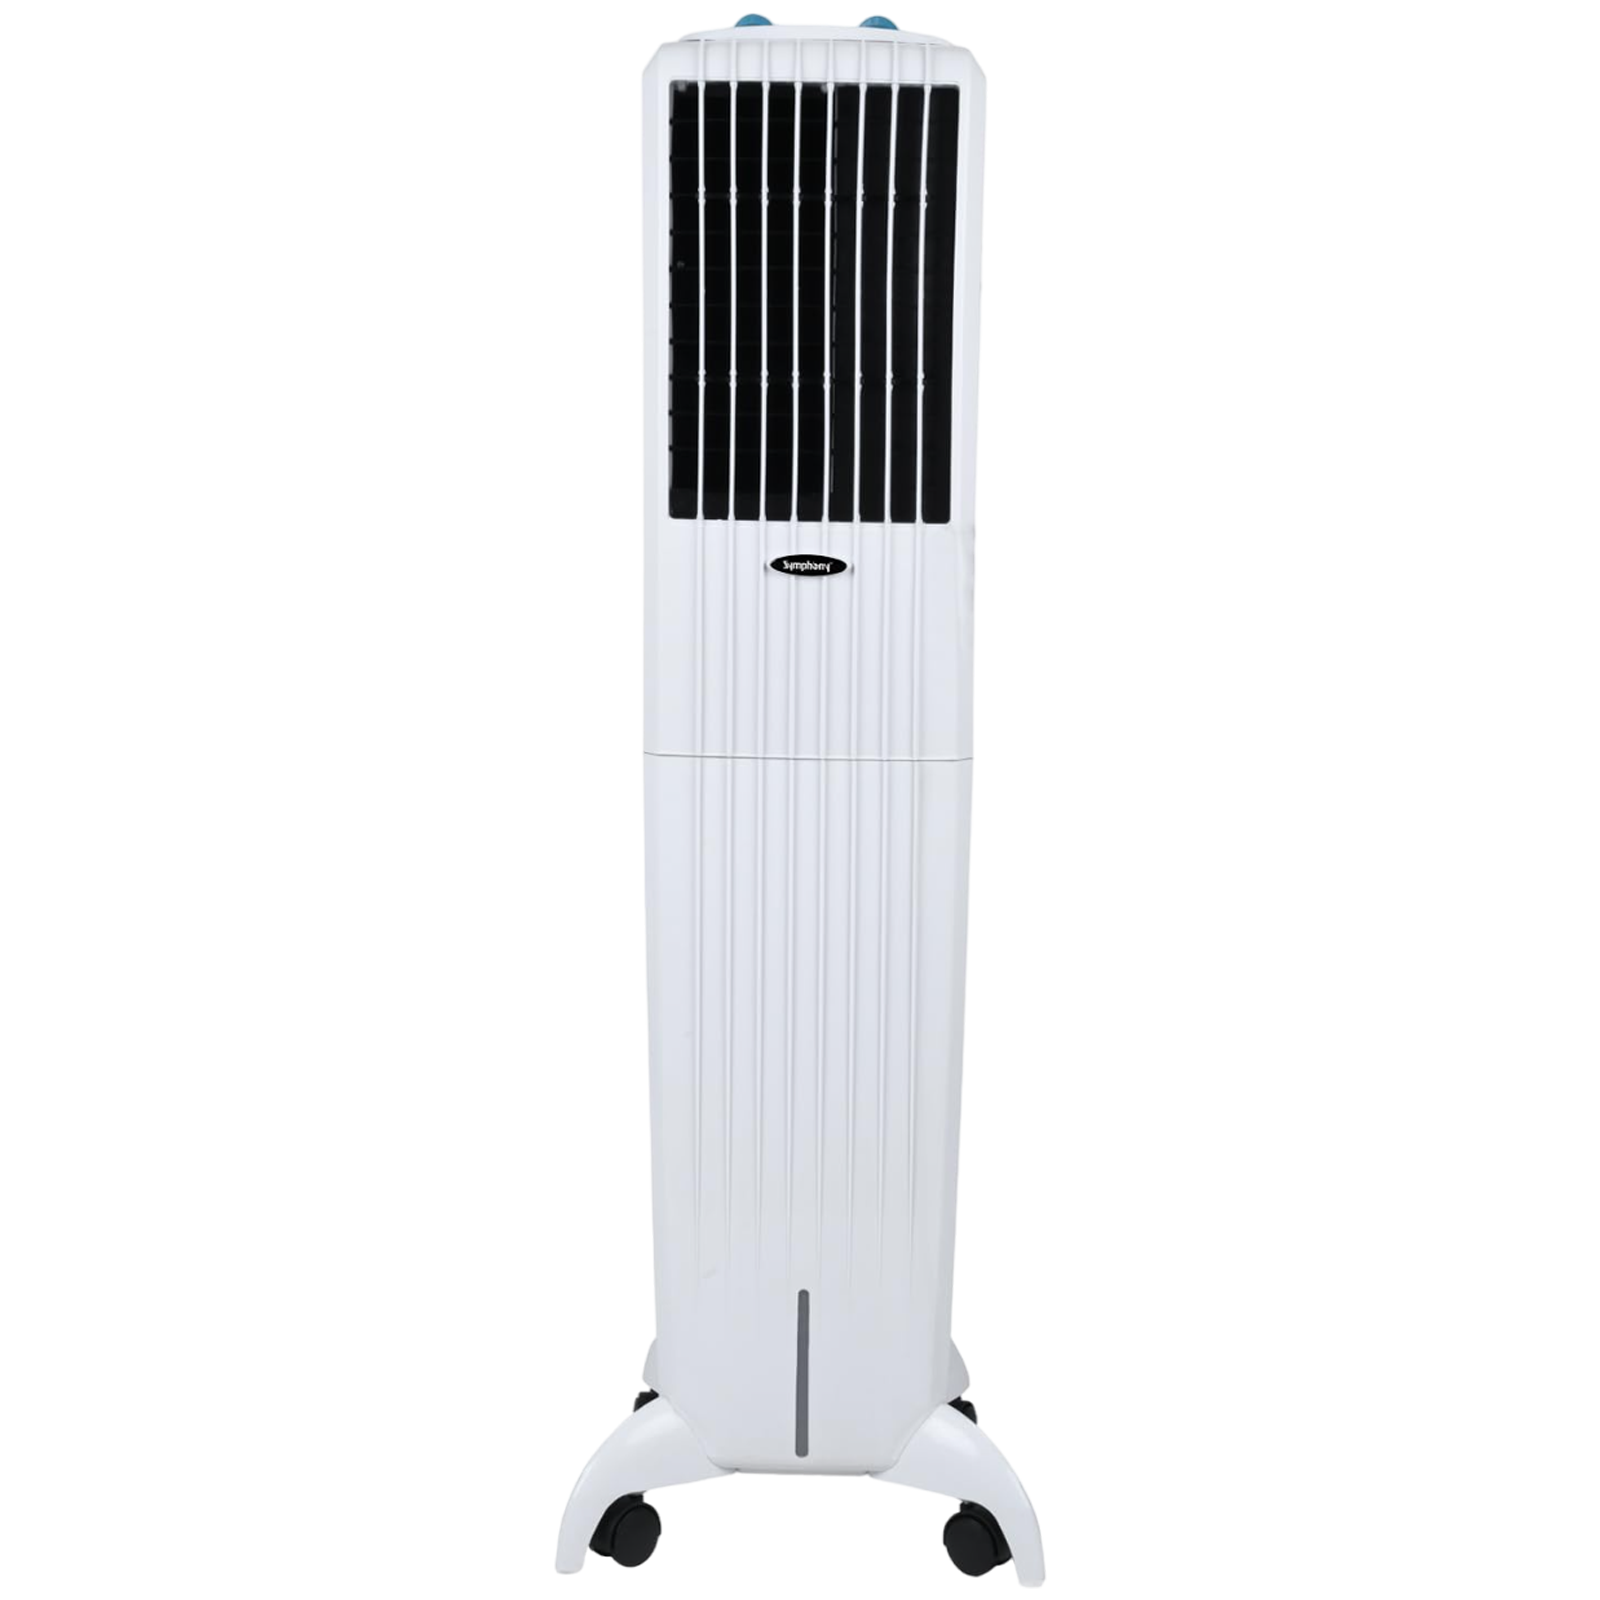 Symphony Diet 50T 50 Litres Tower Air Cooler with i-Pure Technology (Cool Flow Dispenser, White)